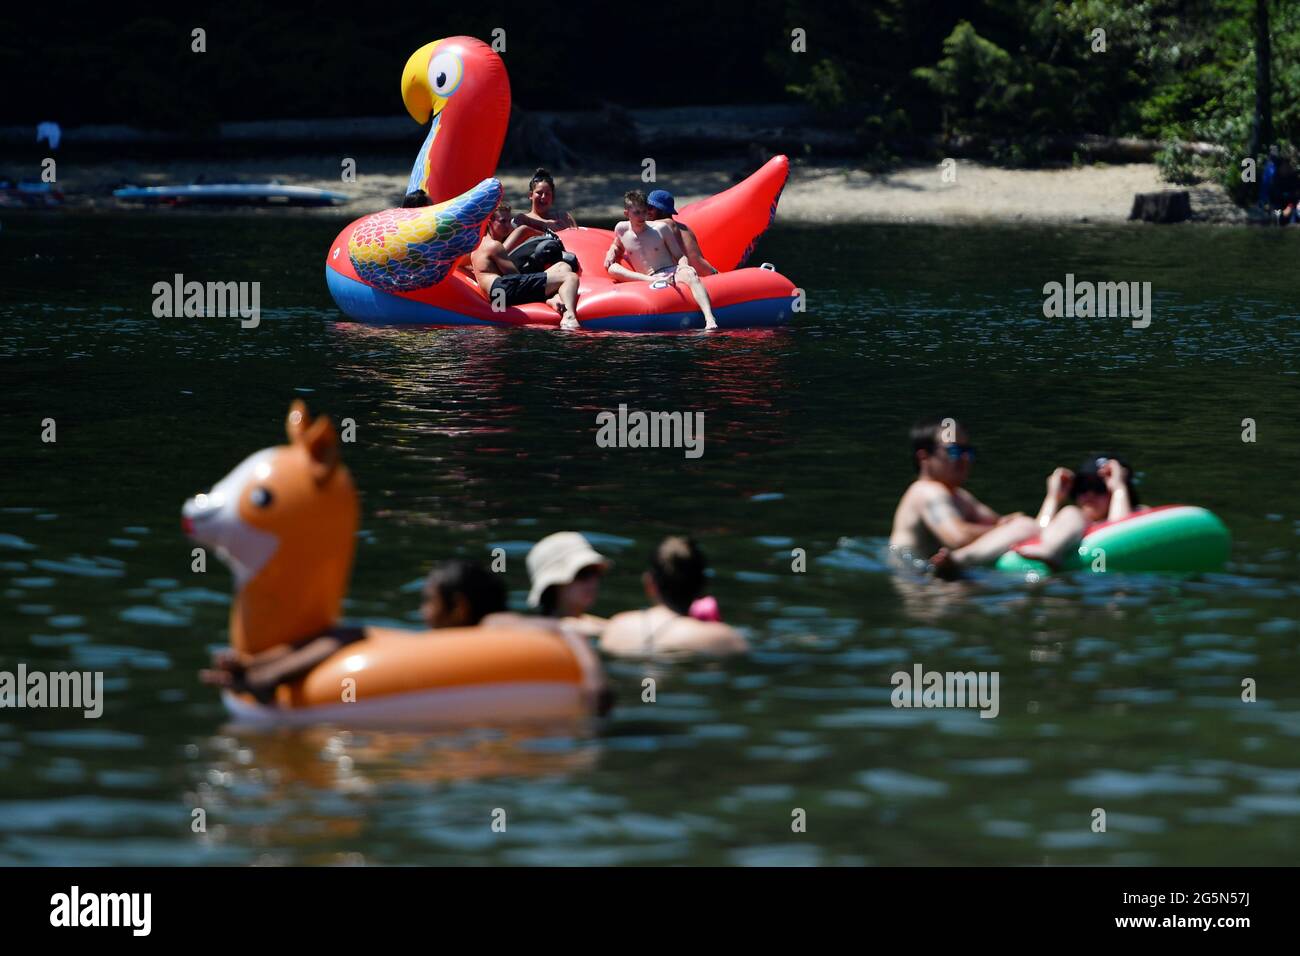 People head to Alouette Lake to cool off during the scorching weather of a heatwave in Maple Ridge, British Columbia, Canada June 28, 2021. REUTERS/Jennifer Gauthier Stock Photo